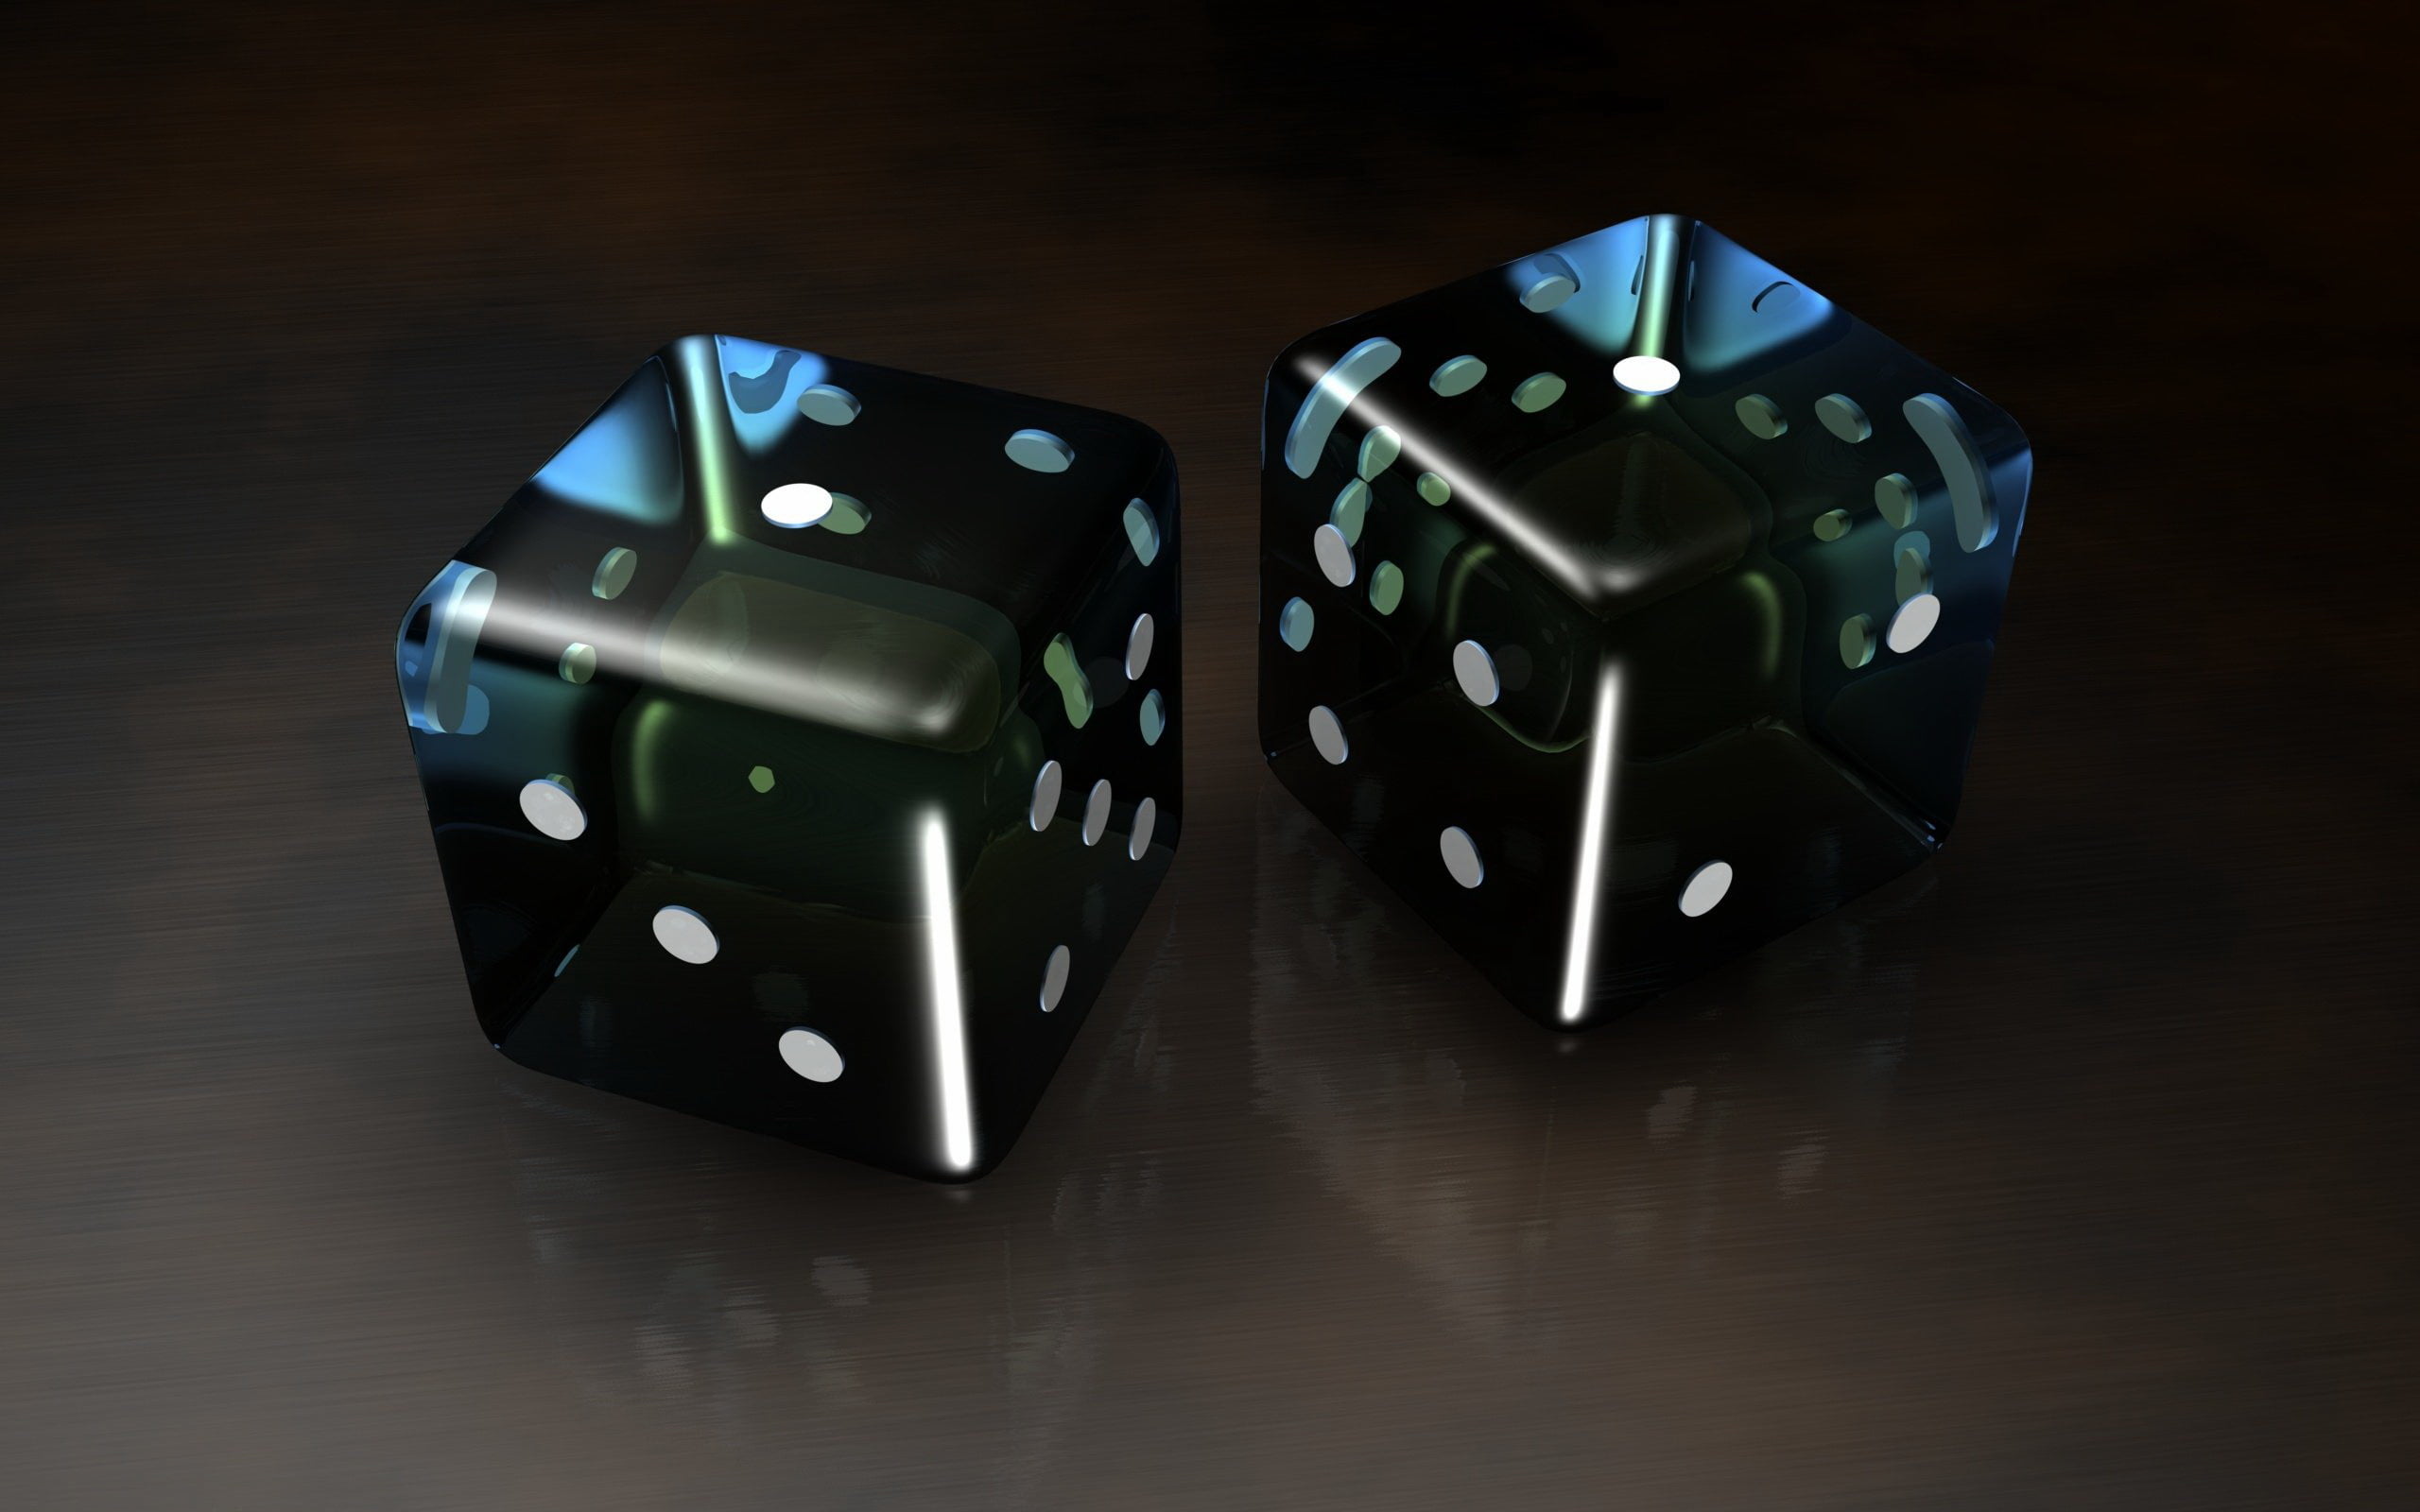 two blue and white dice wallpaper, snakes, Eyes, cube, gambling